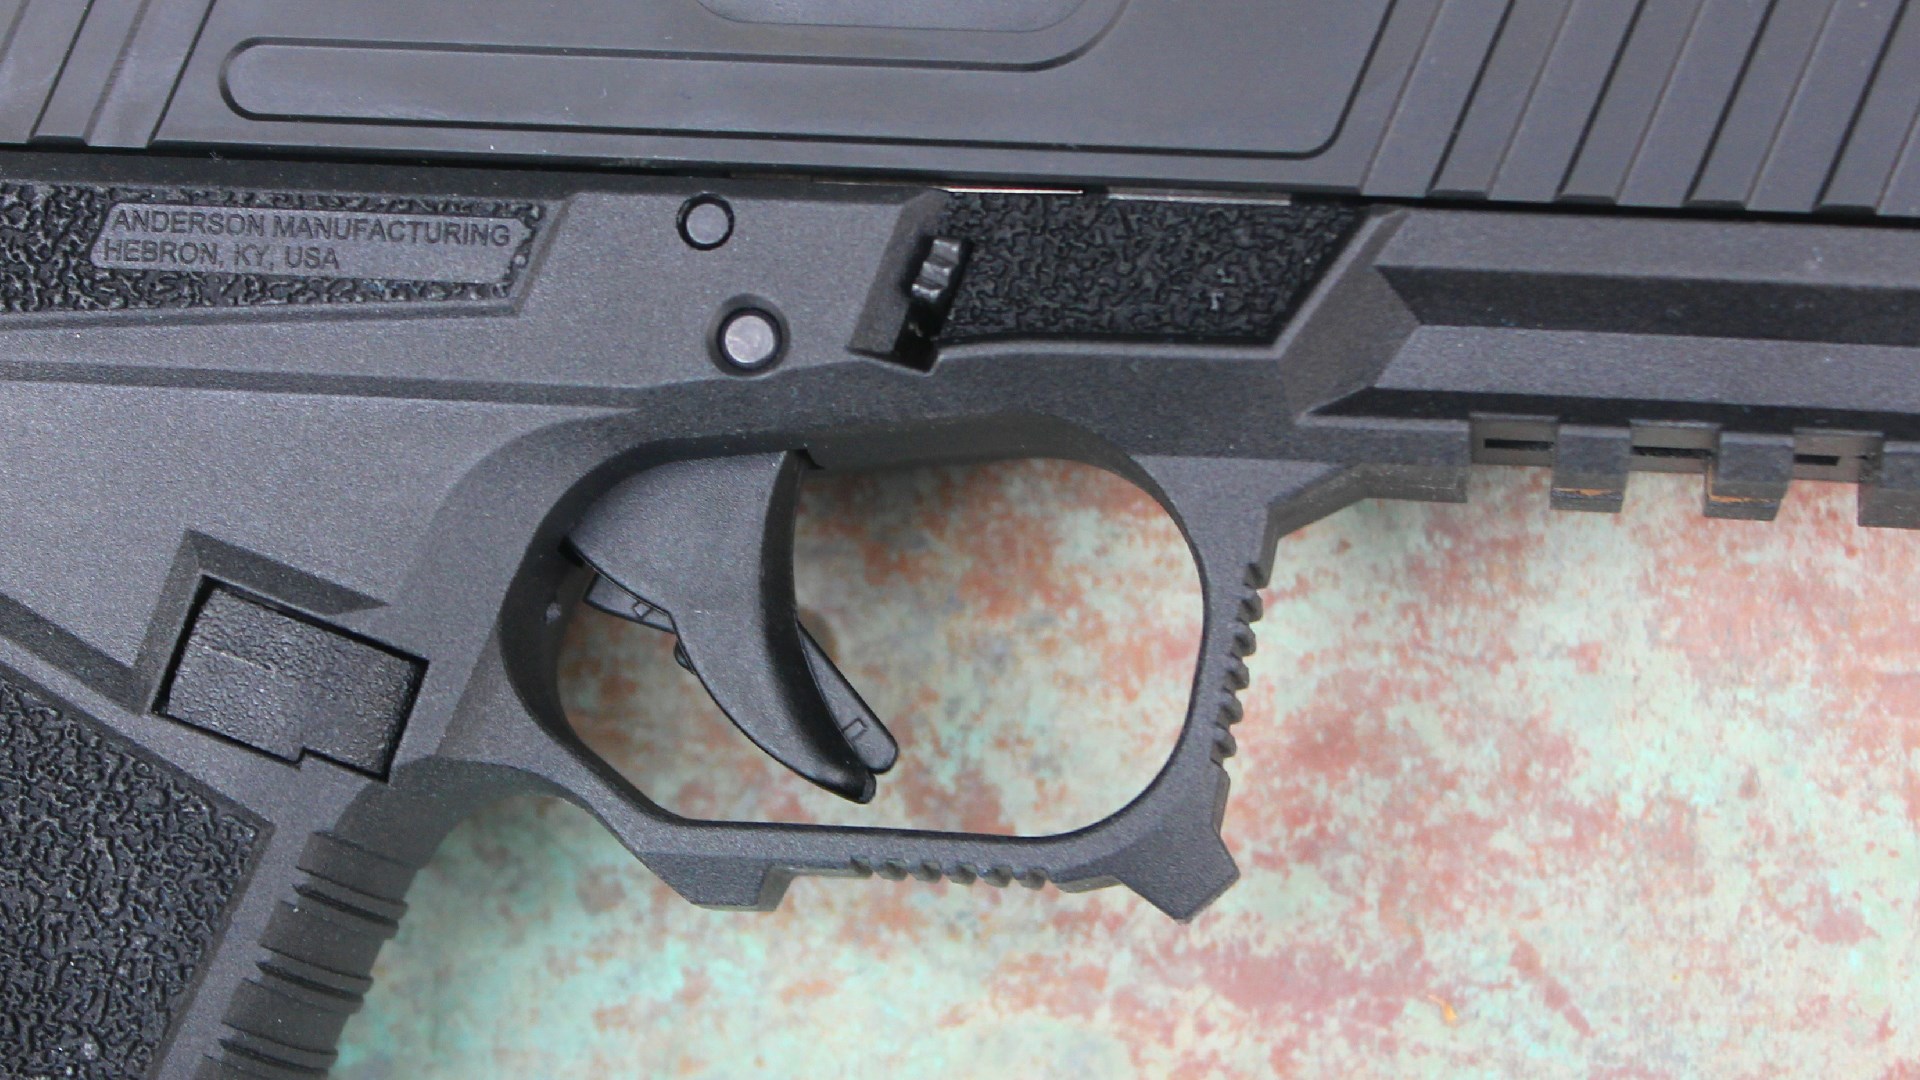 Kiger 9c pistol closeup-view right side gun 9mm trigger and takedown lever plastic metal black